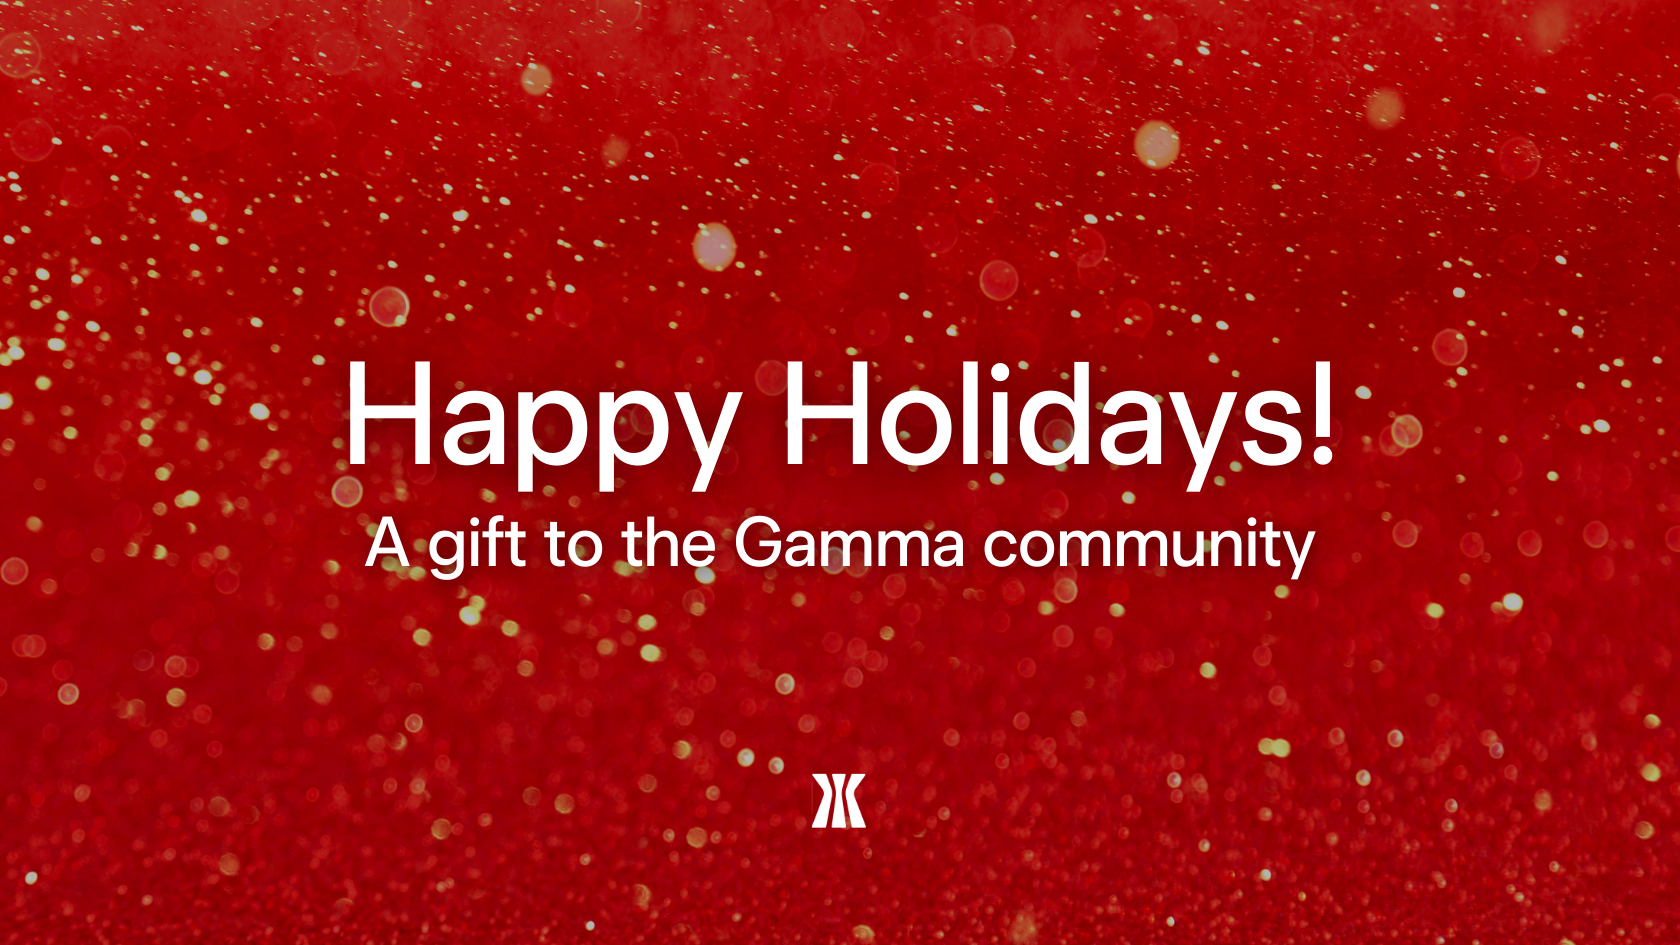 Happy Holidays! A gift to the Gamma community